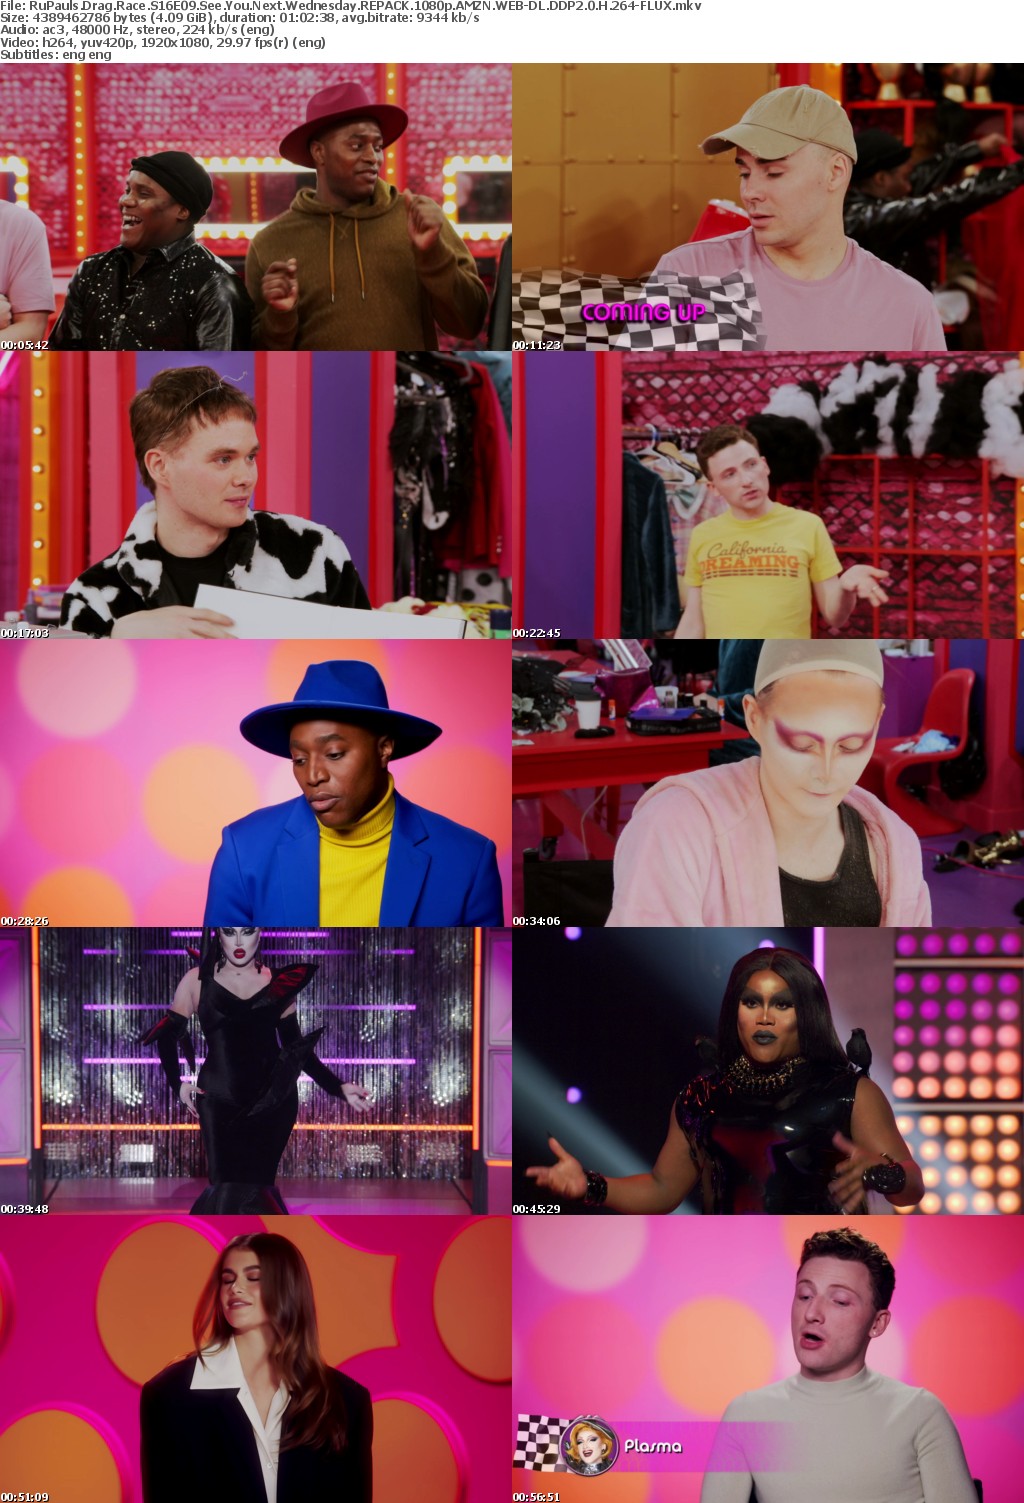 RuPauls Drag Race S16E09 See You Next Wednesday REPACK 1080p AMZN WEB-DL DDP2 0 H 264-FLUX